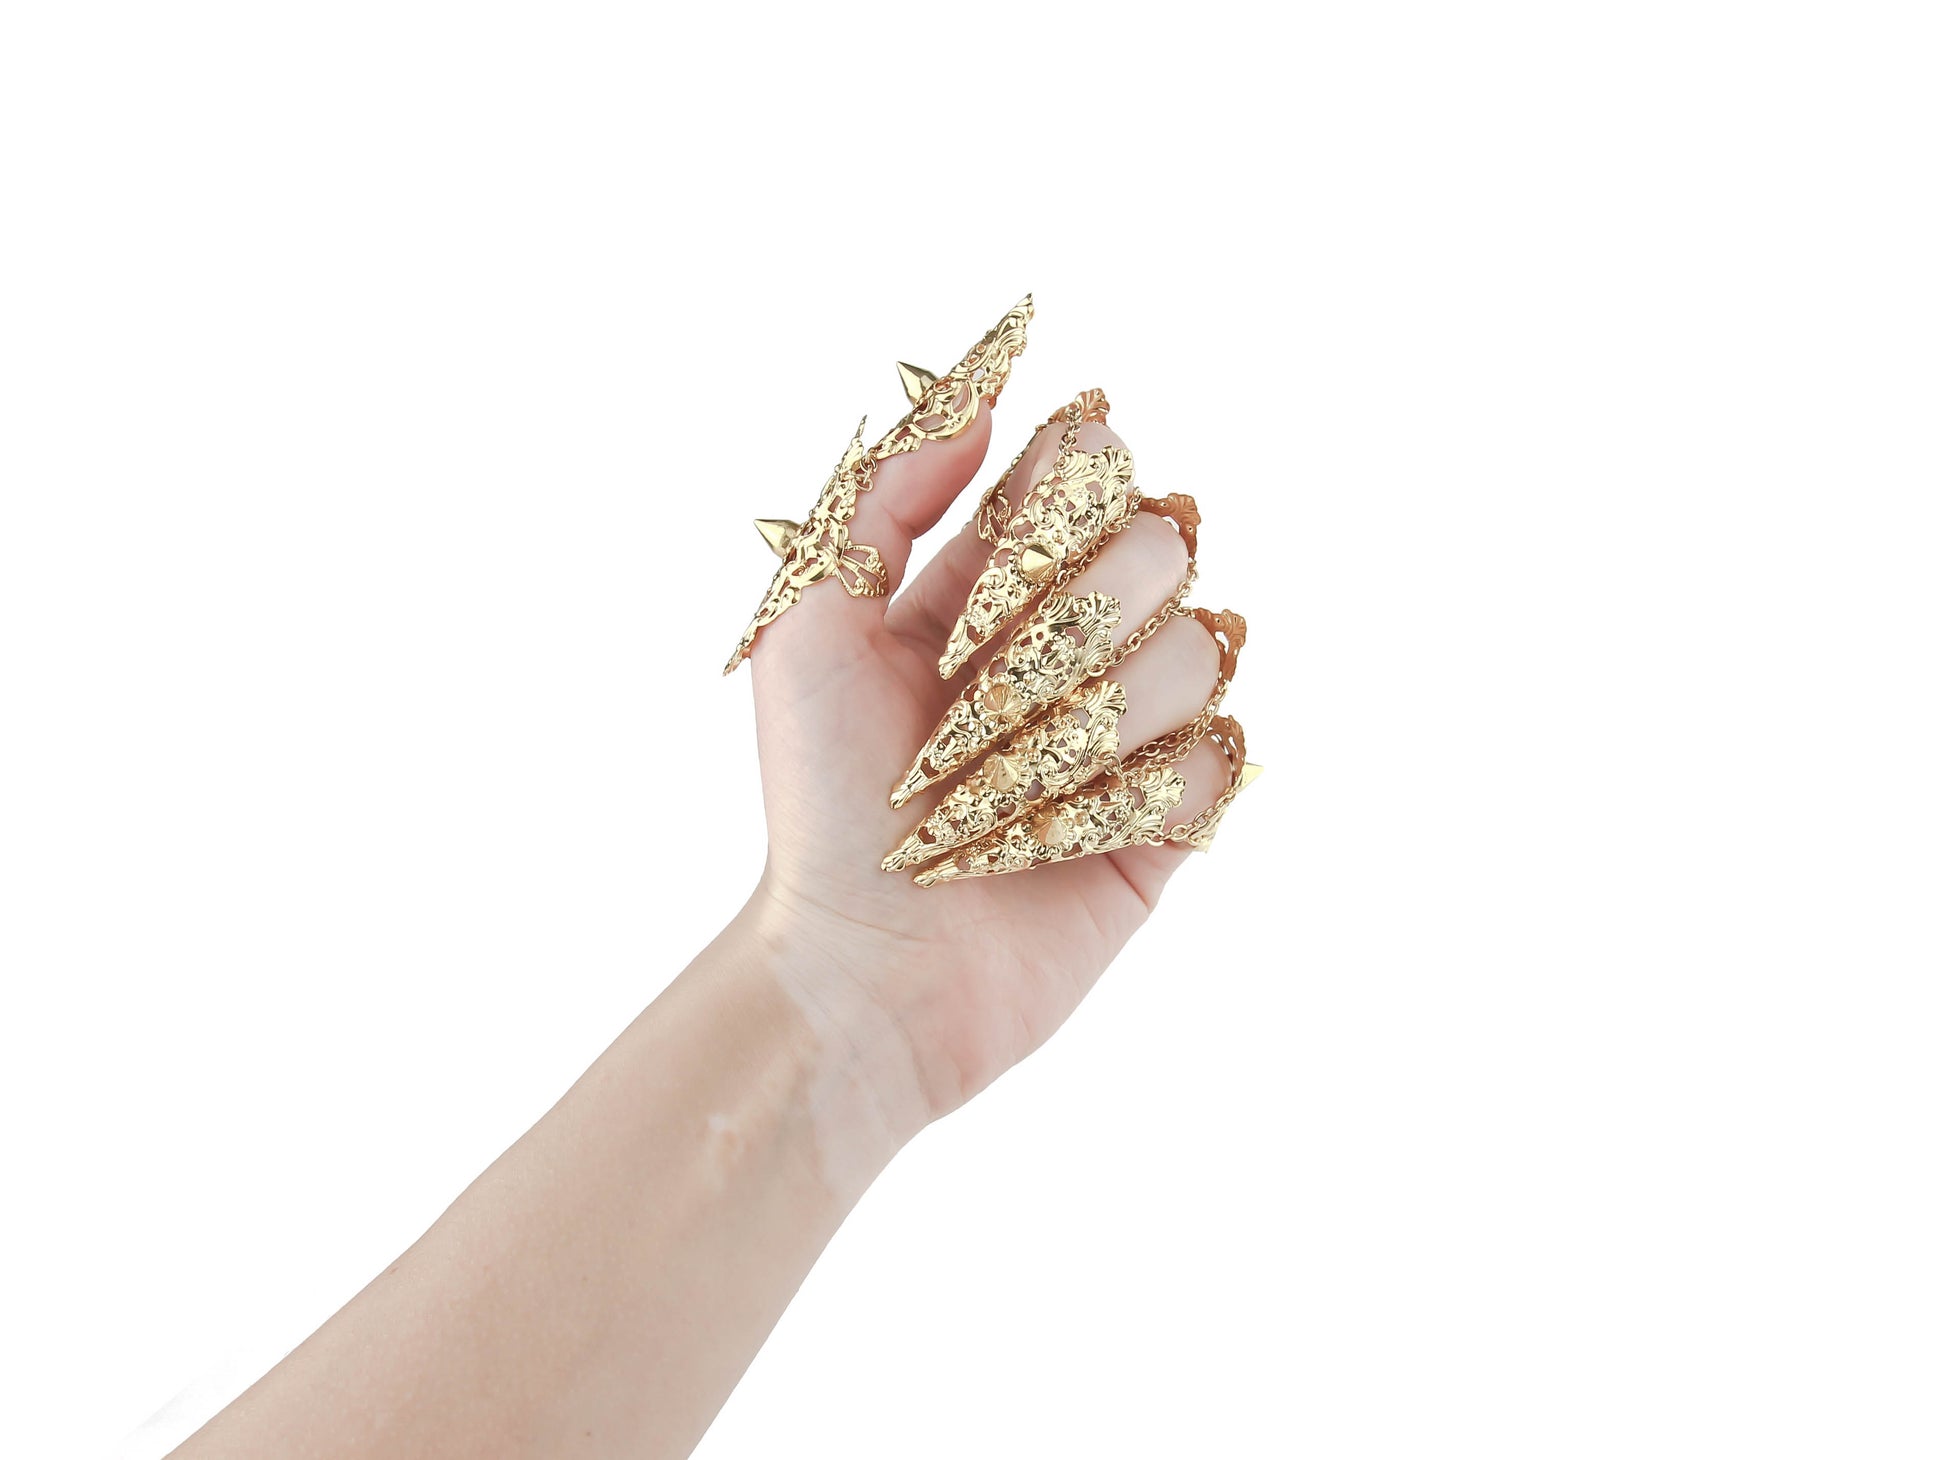 An image captures a hand fully clad in Myril Jewels' studded gold nail claw rings, each piece boasting intricate detailing and sharp studs that epitomize the neo-goth aesthetic. This daring collection is ideal for those who embrace the dark-avantgarde culture, perfect as an edgy accessory for Halloween, punk events, or to add a gothic-chic flair to everyday attire. These rings are a bold statement for witchcore, whimsigoth, or minimal goth styles and will turn heads at any rave party or festival.